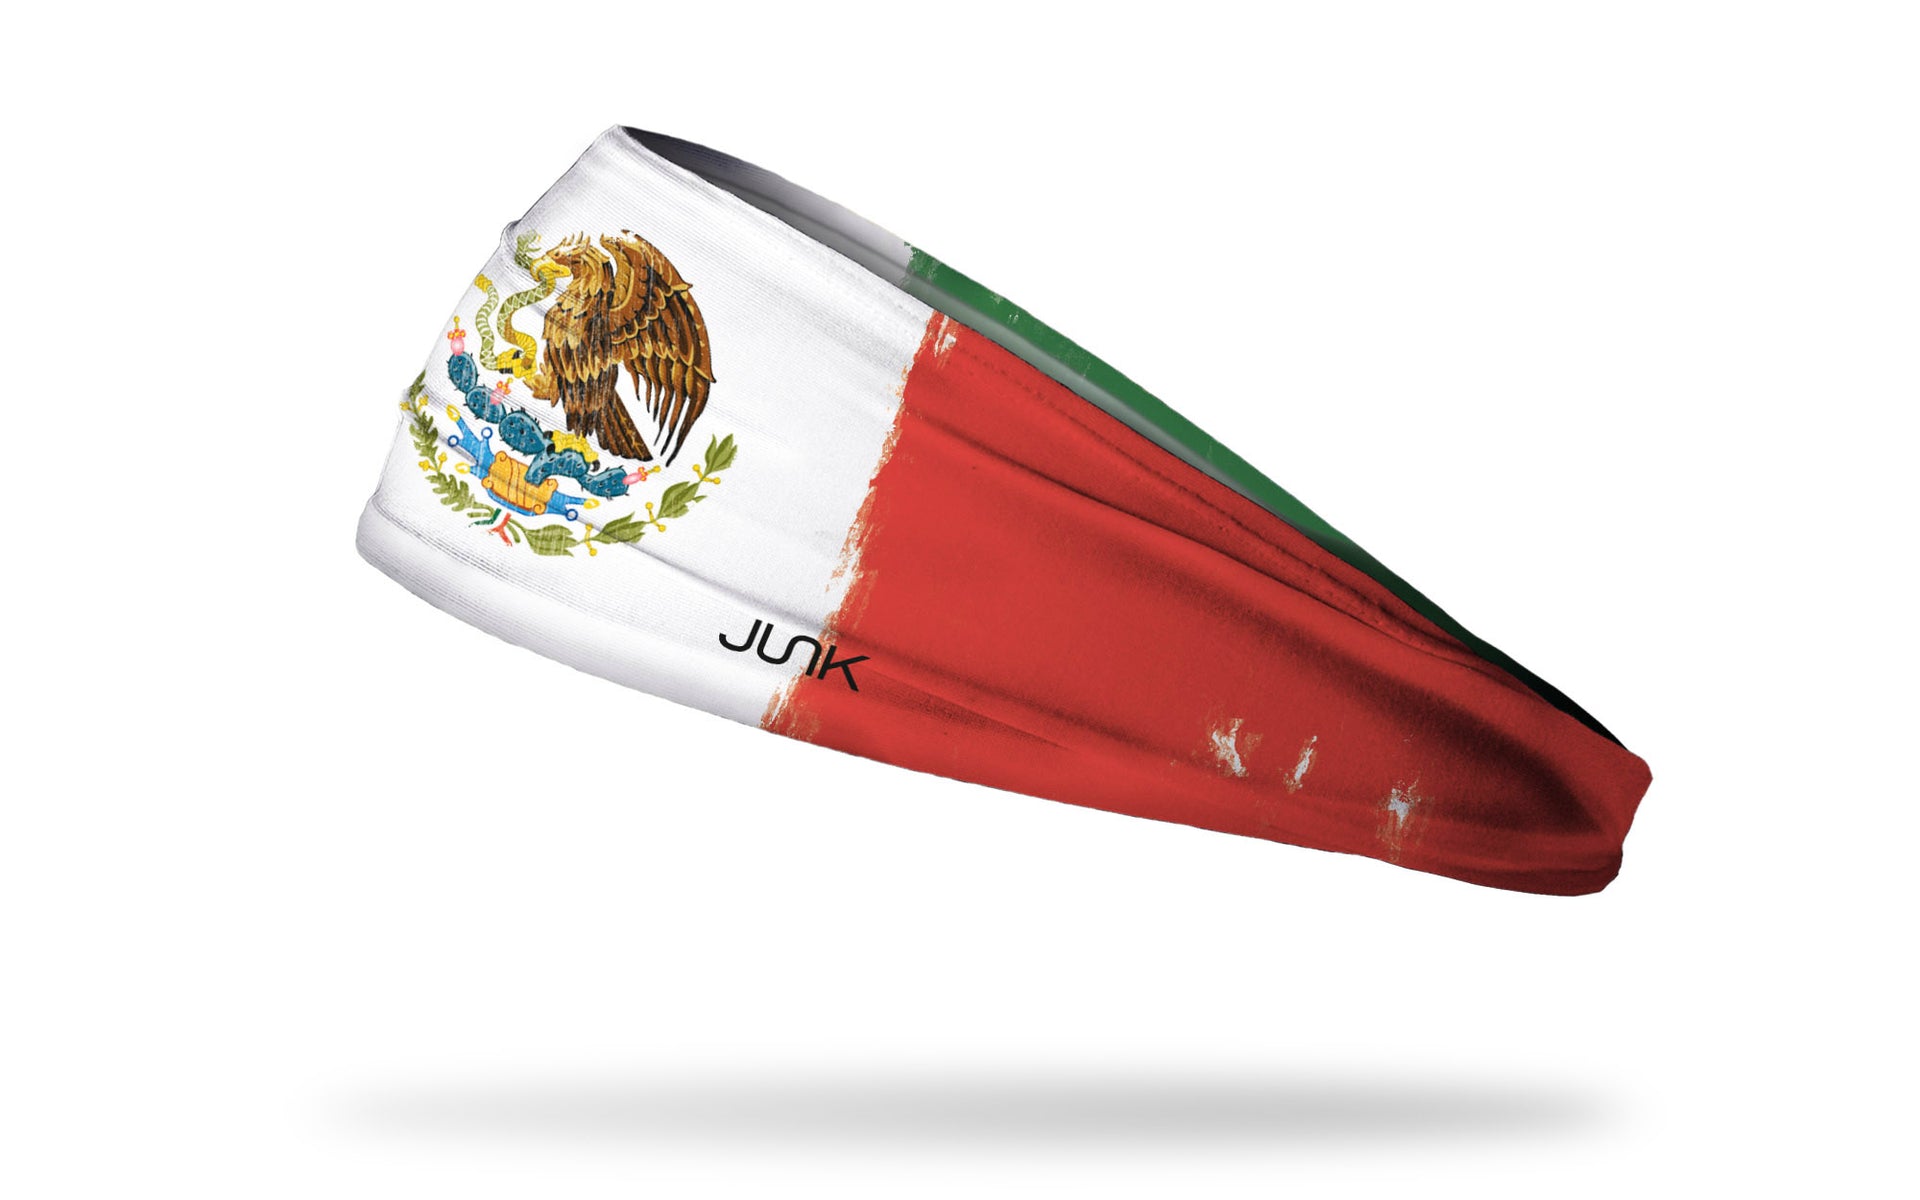 headband with traditional Mexico flag design made to look like it has been painted